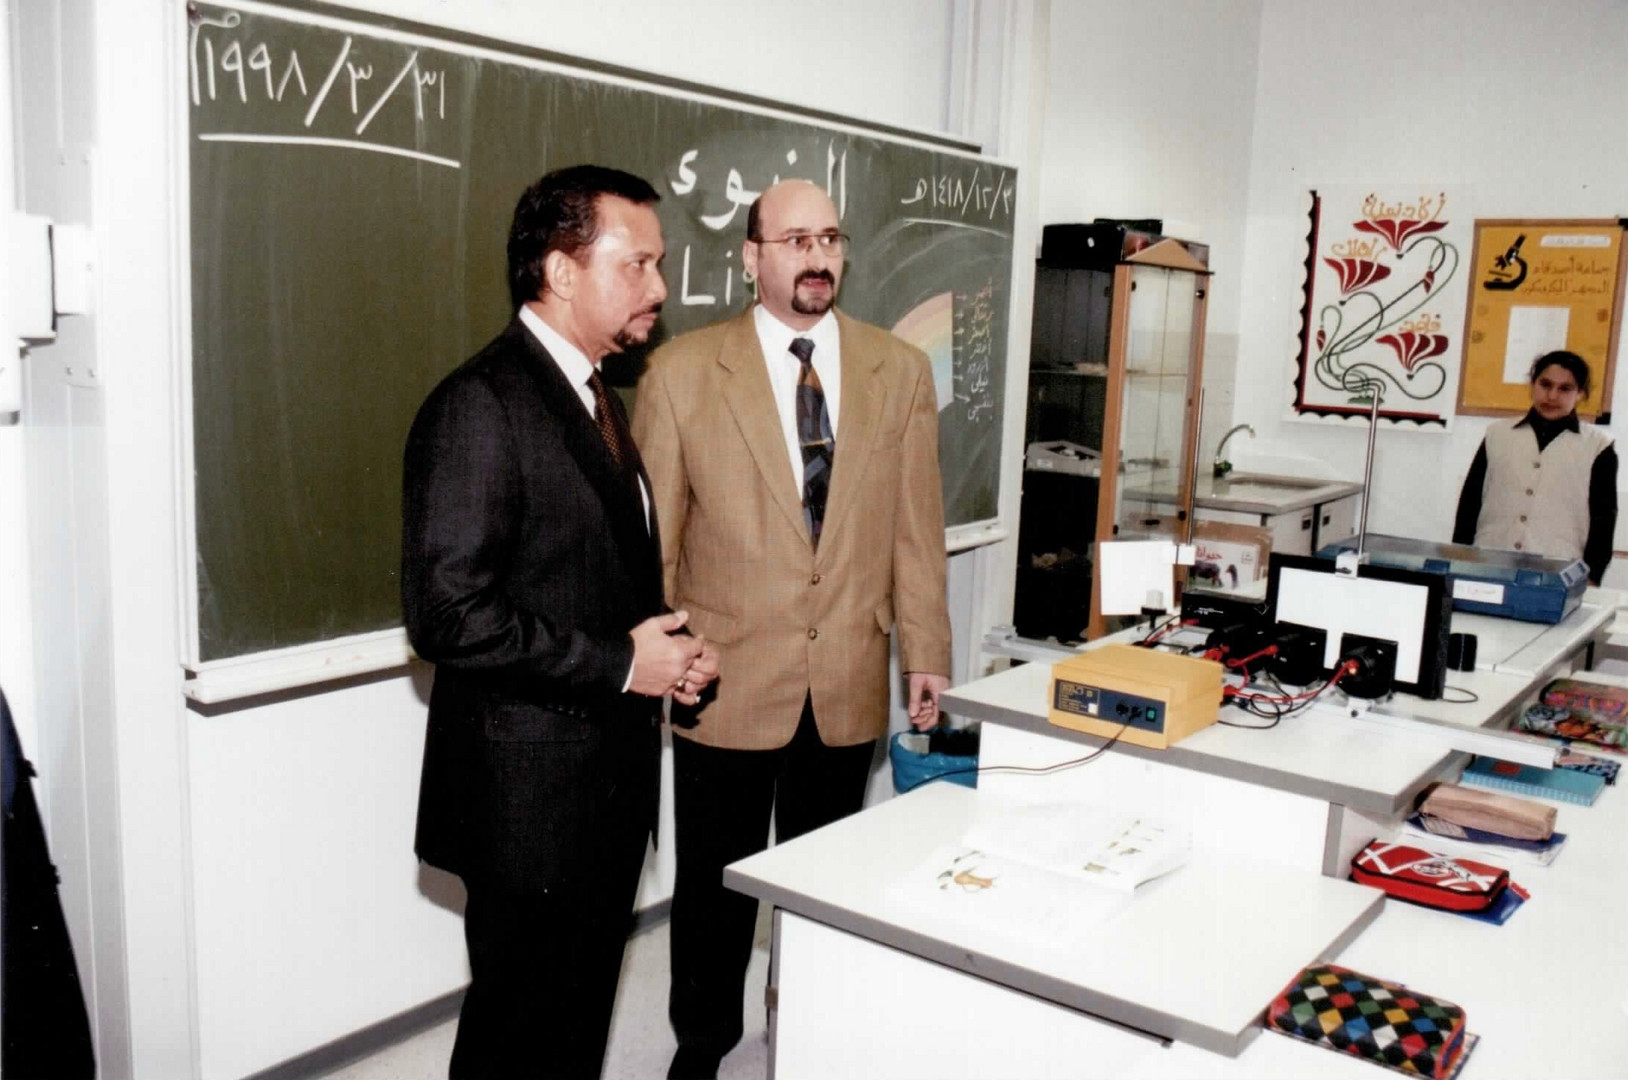 His Majesty The Sultan of Brunei with Dr. Norman Ali Khalaf, Bonn, Germany, 1998